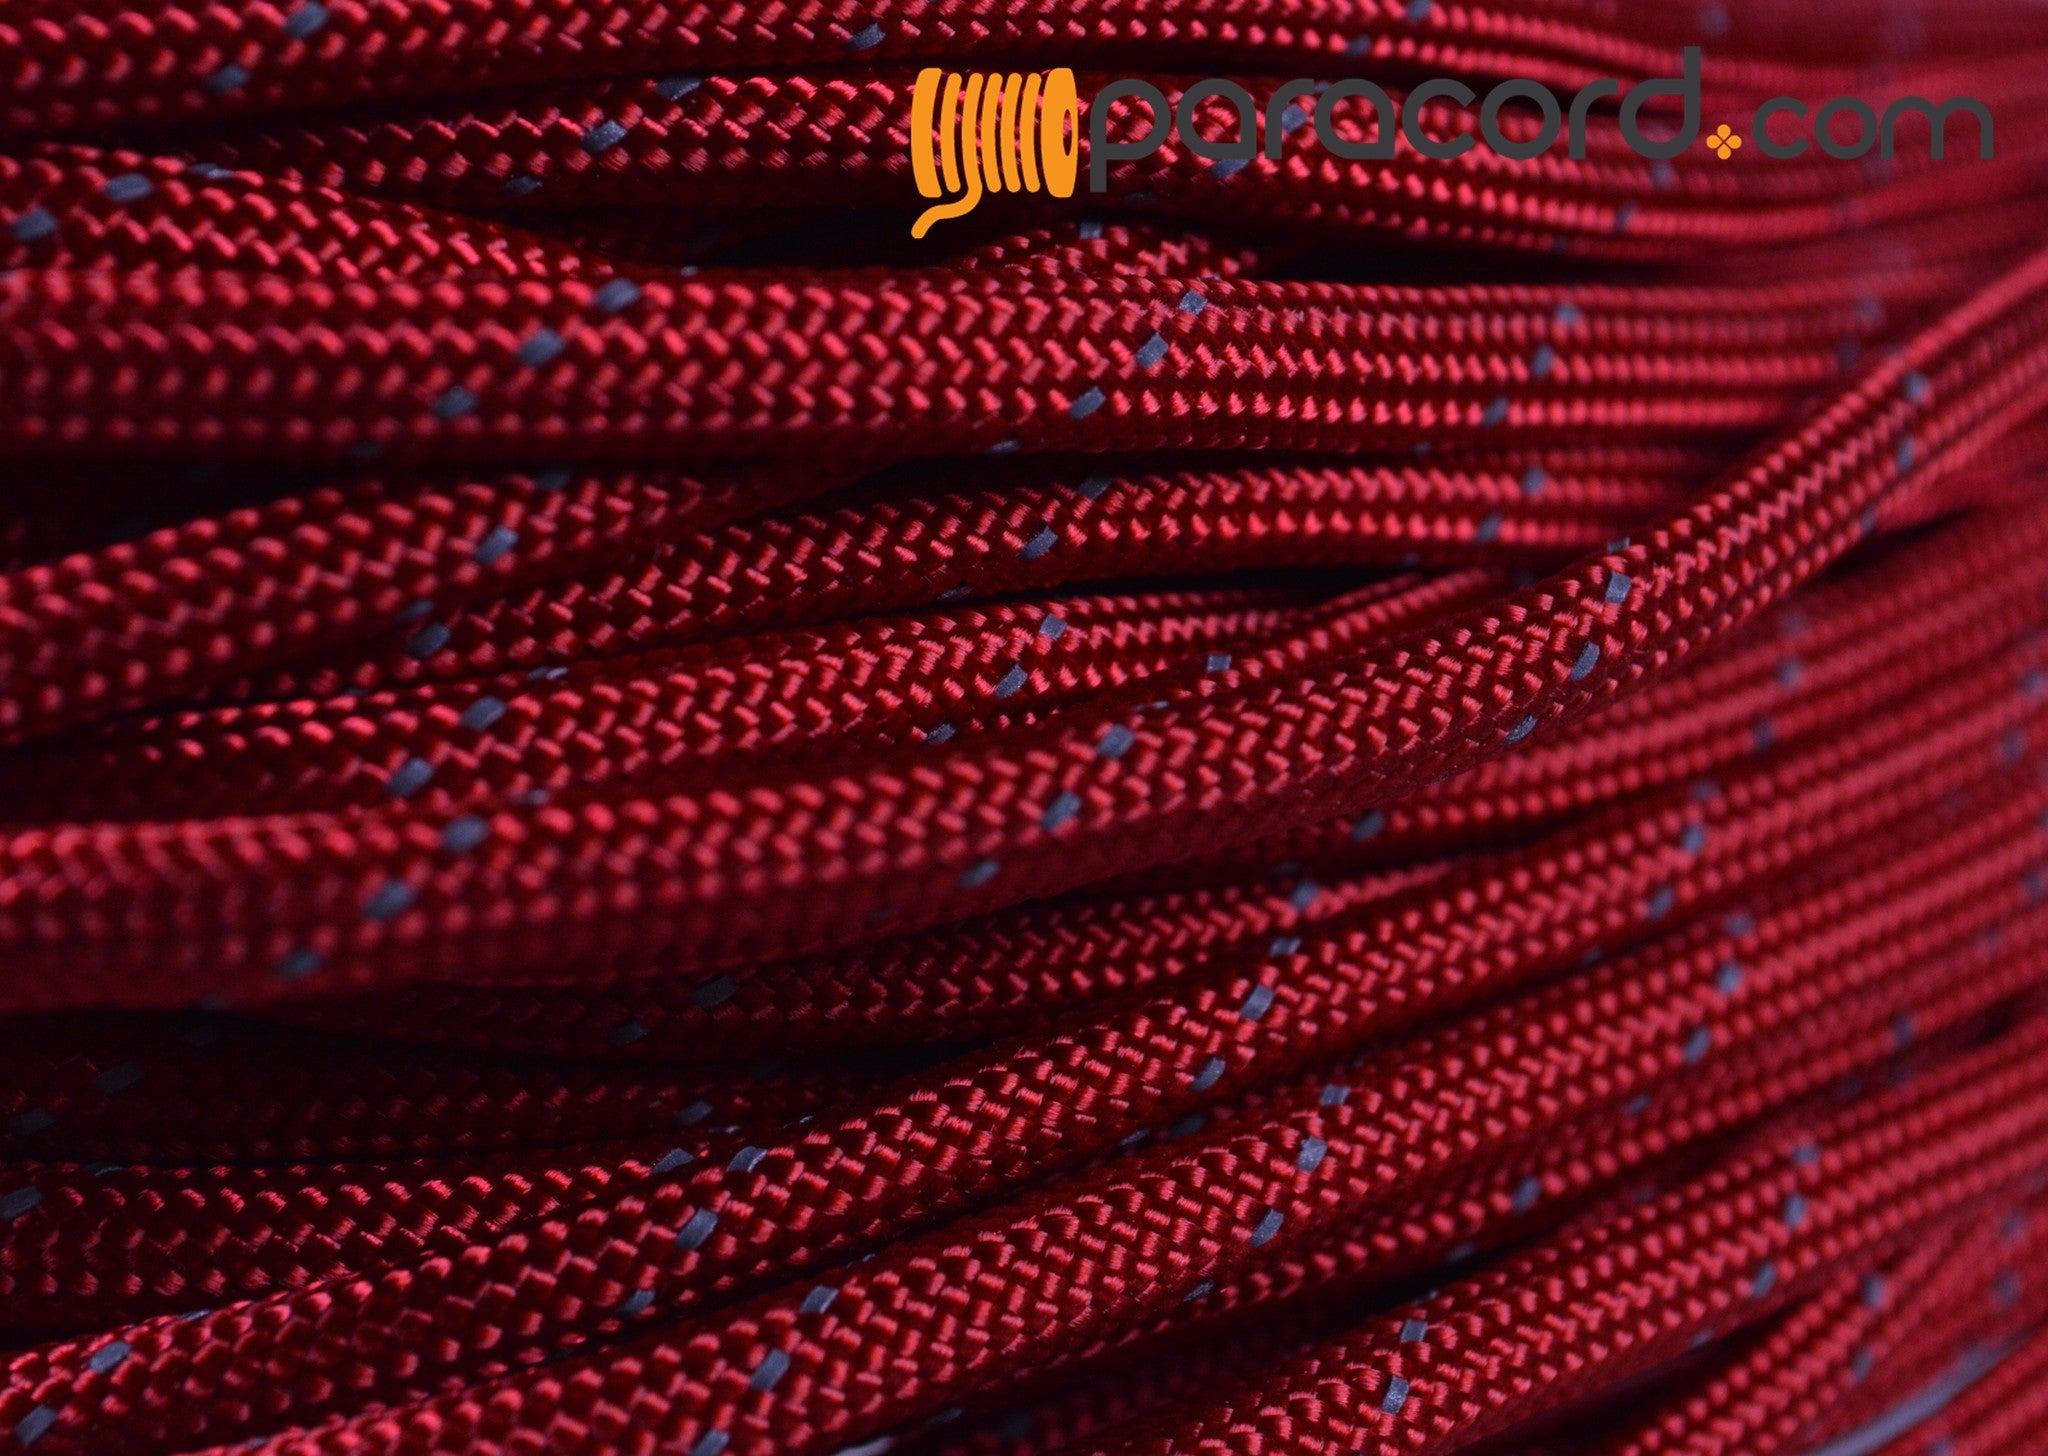 Reflective Tracer Red Paracord